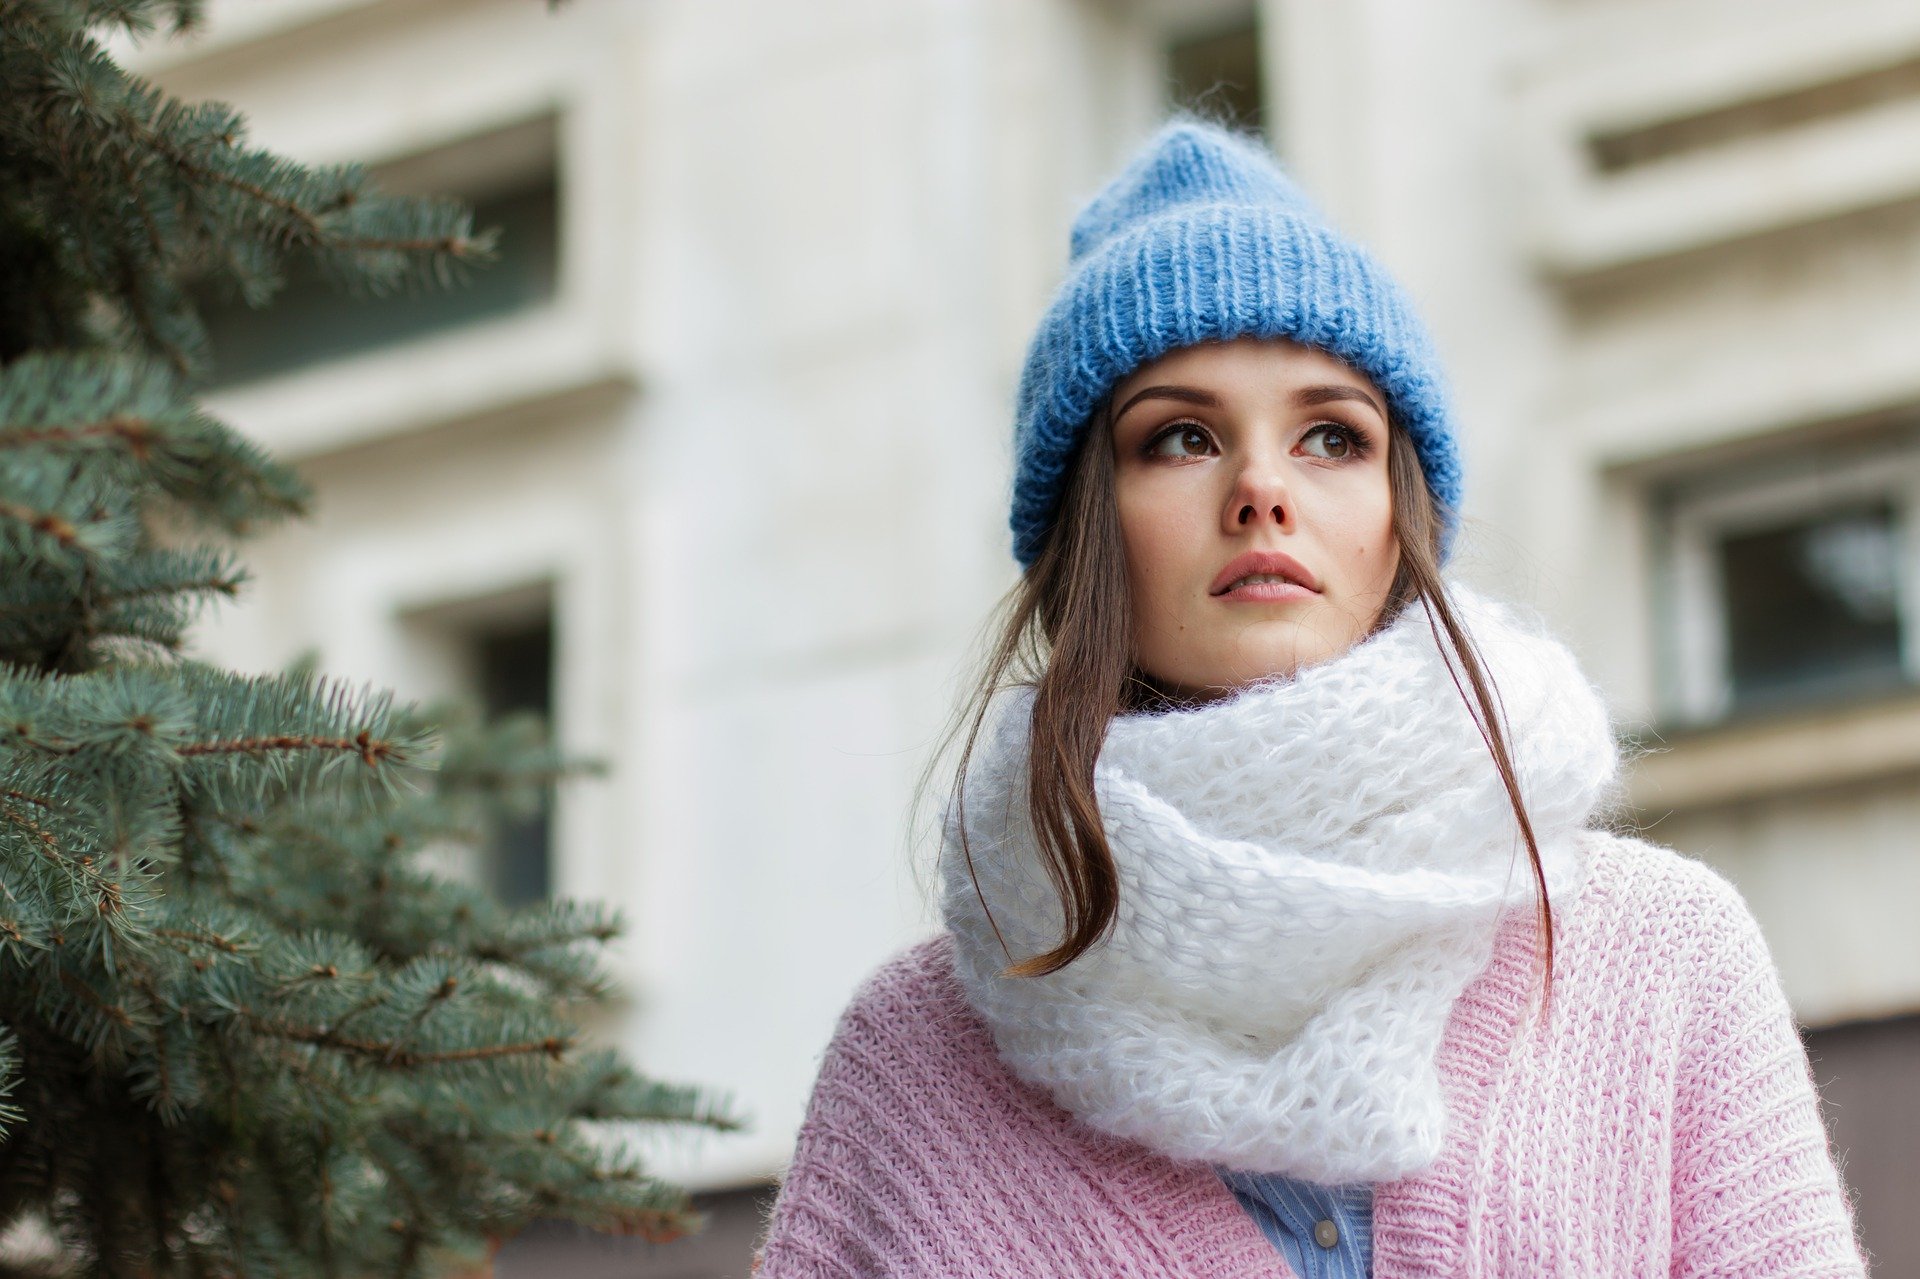 Woman wrapped up warmly while walking outside